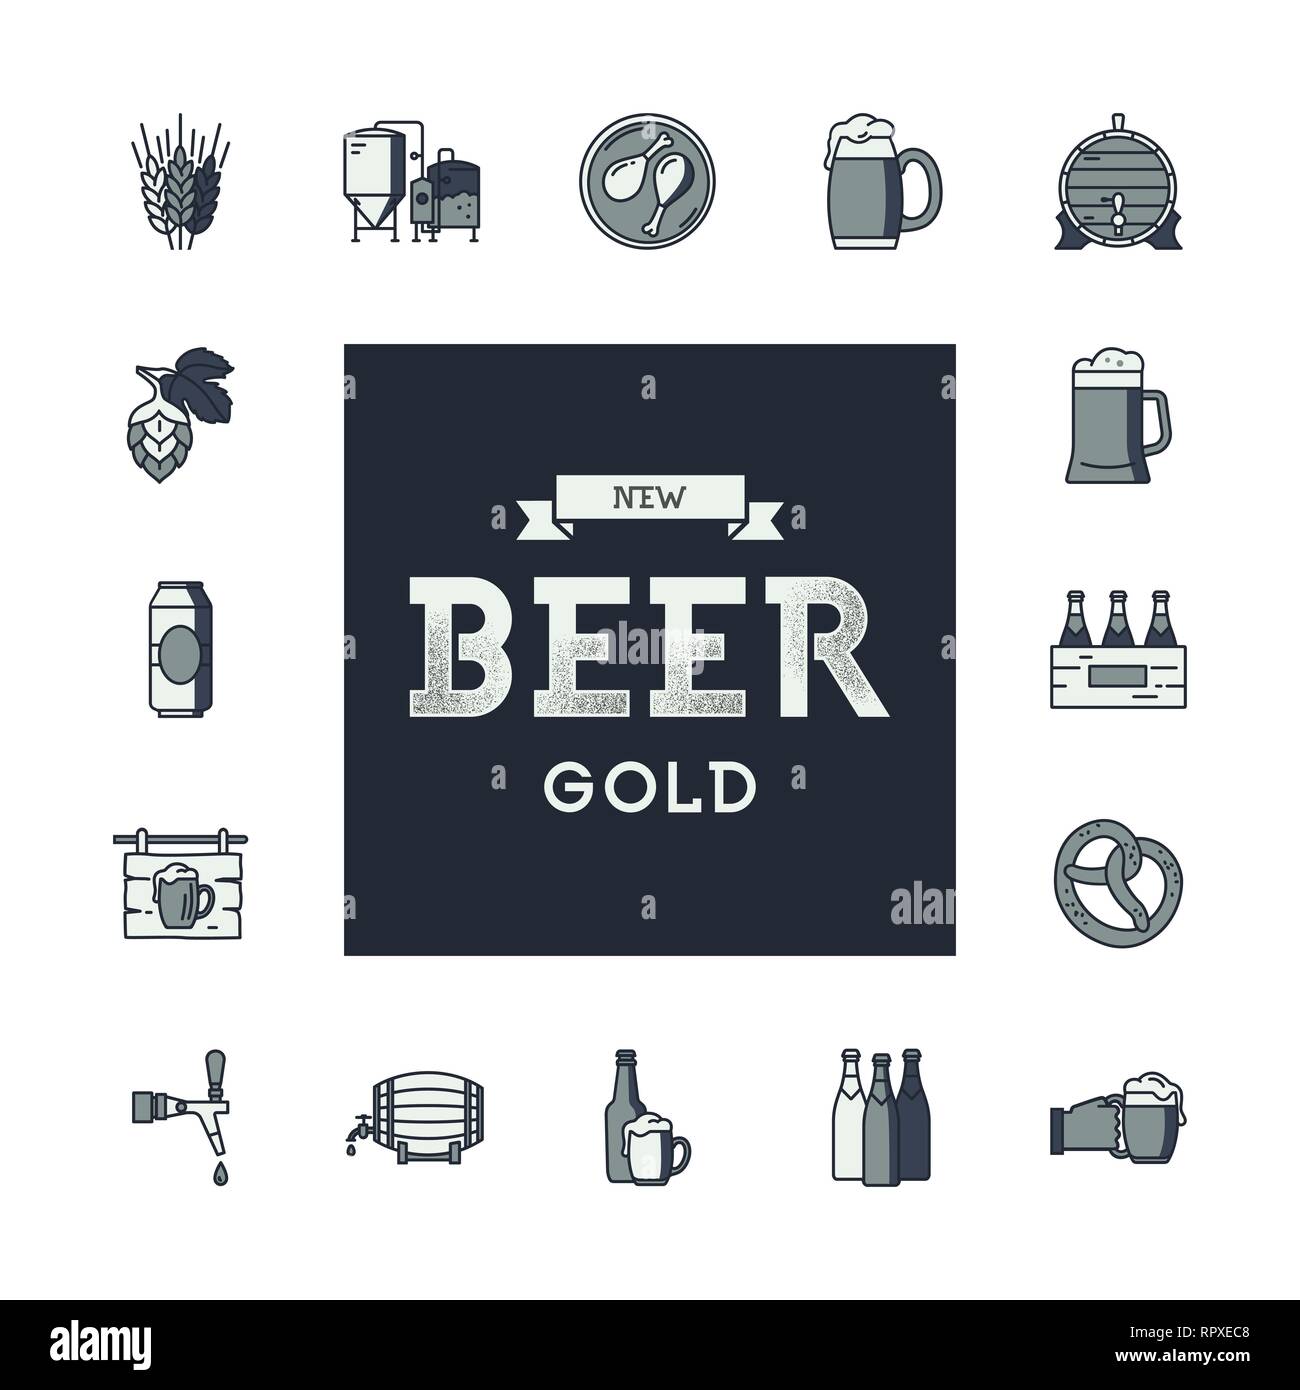 Set of beer icons in retro style. Logo for pub, bar, craft beer brewery. Stock Vector